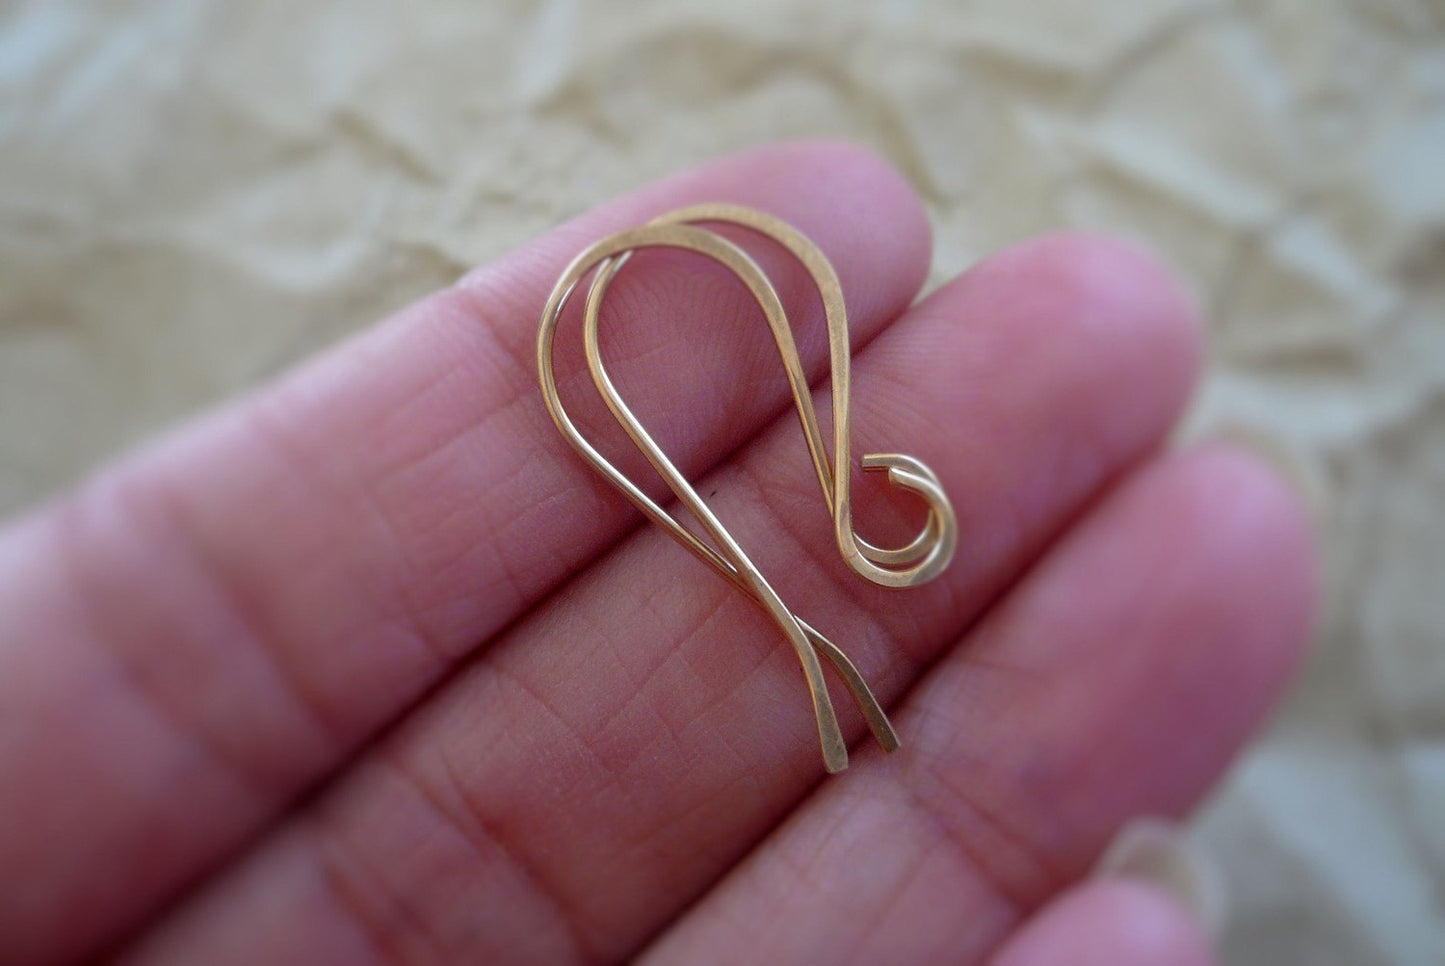 Solitaire 14kt Goldfill Earwires - Handmade. Handforged